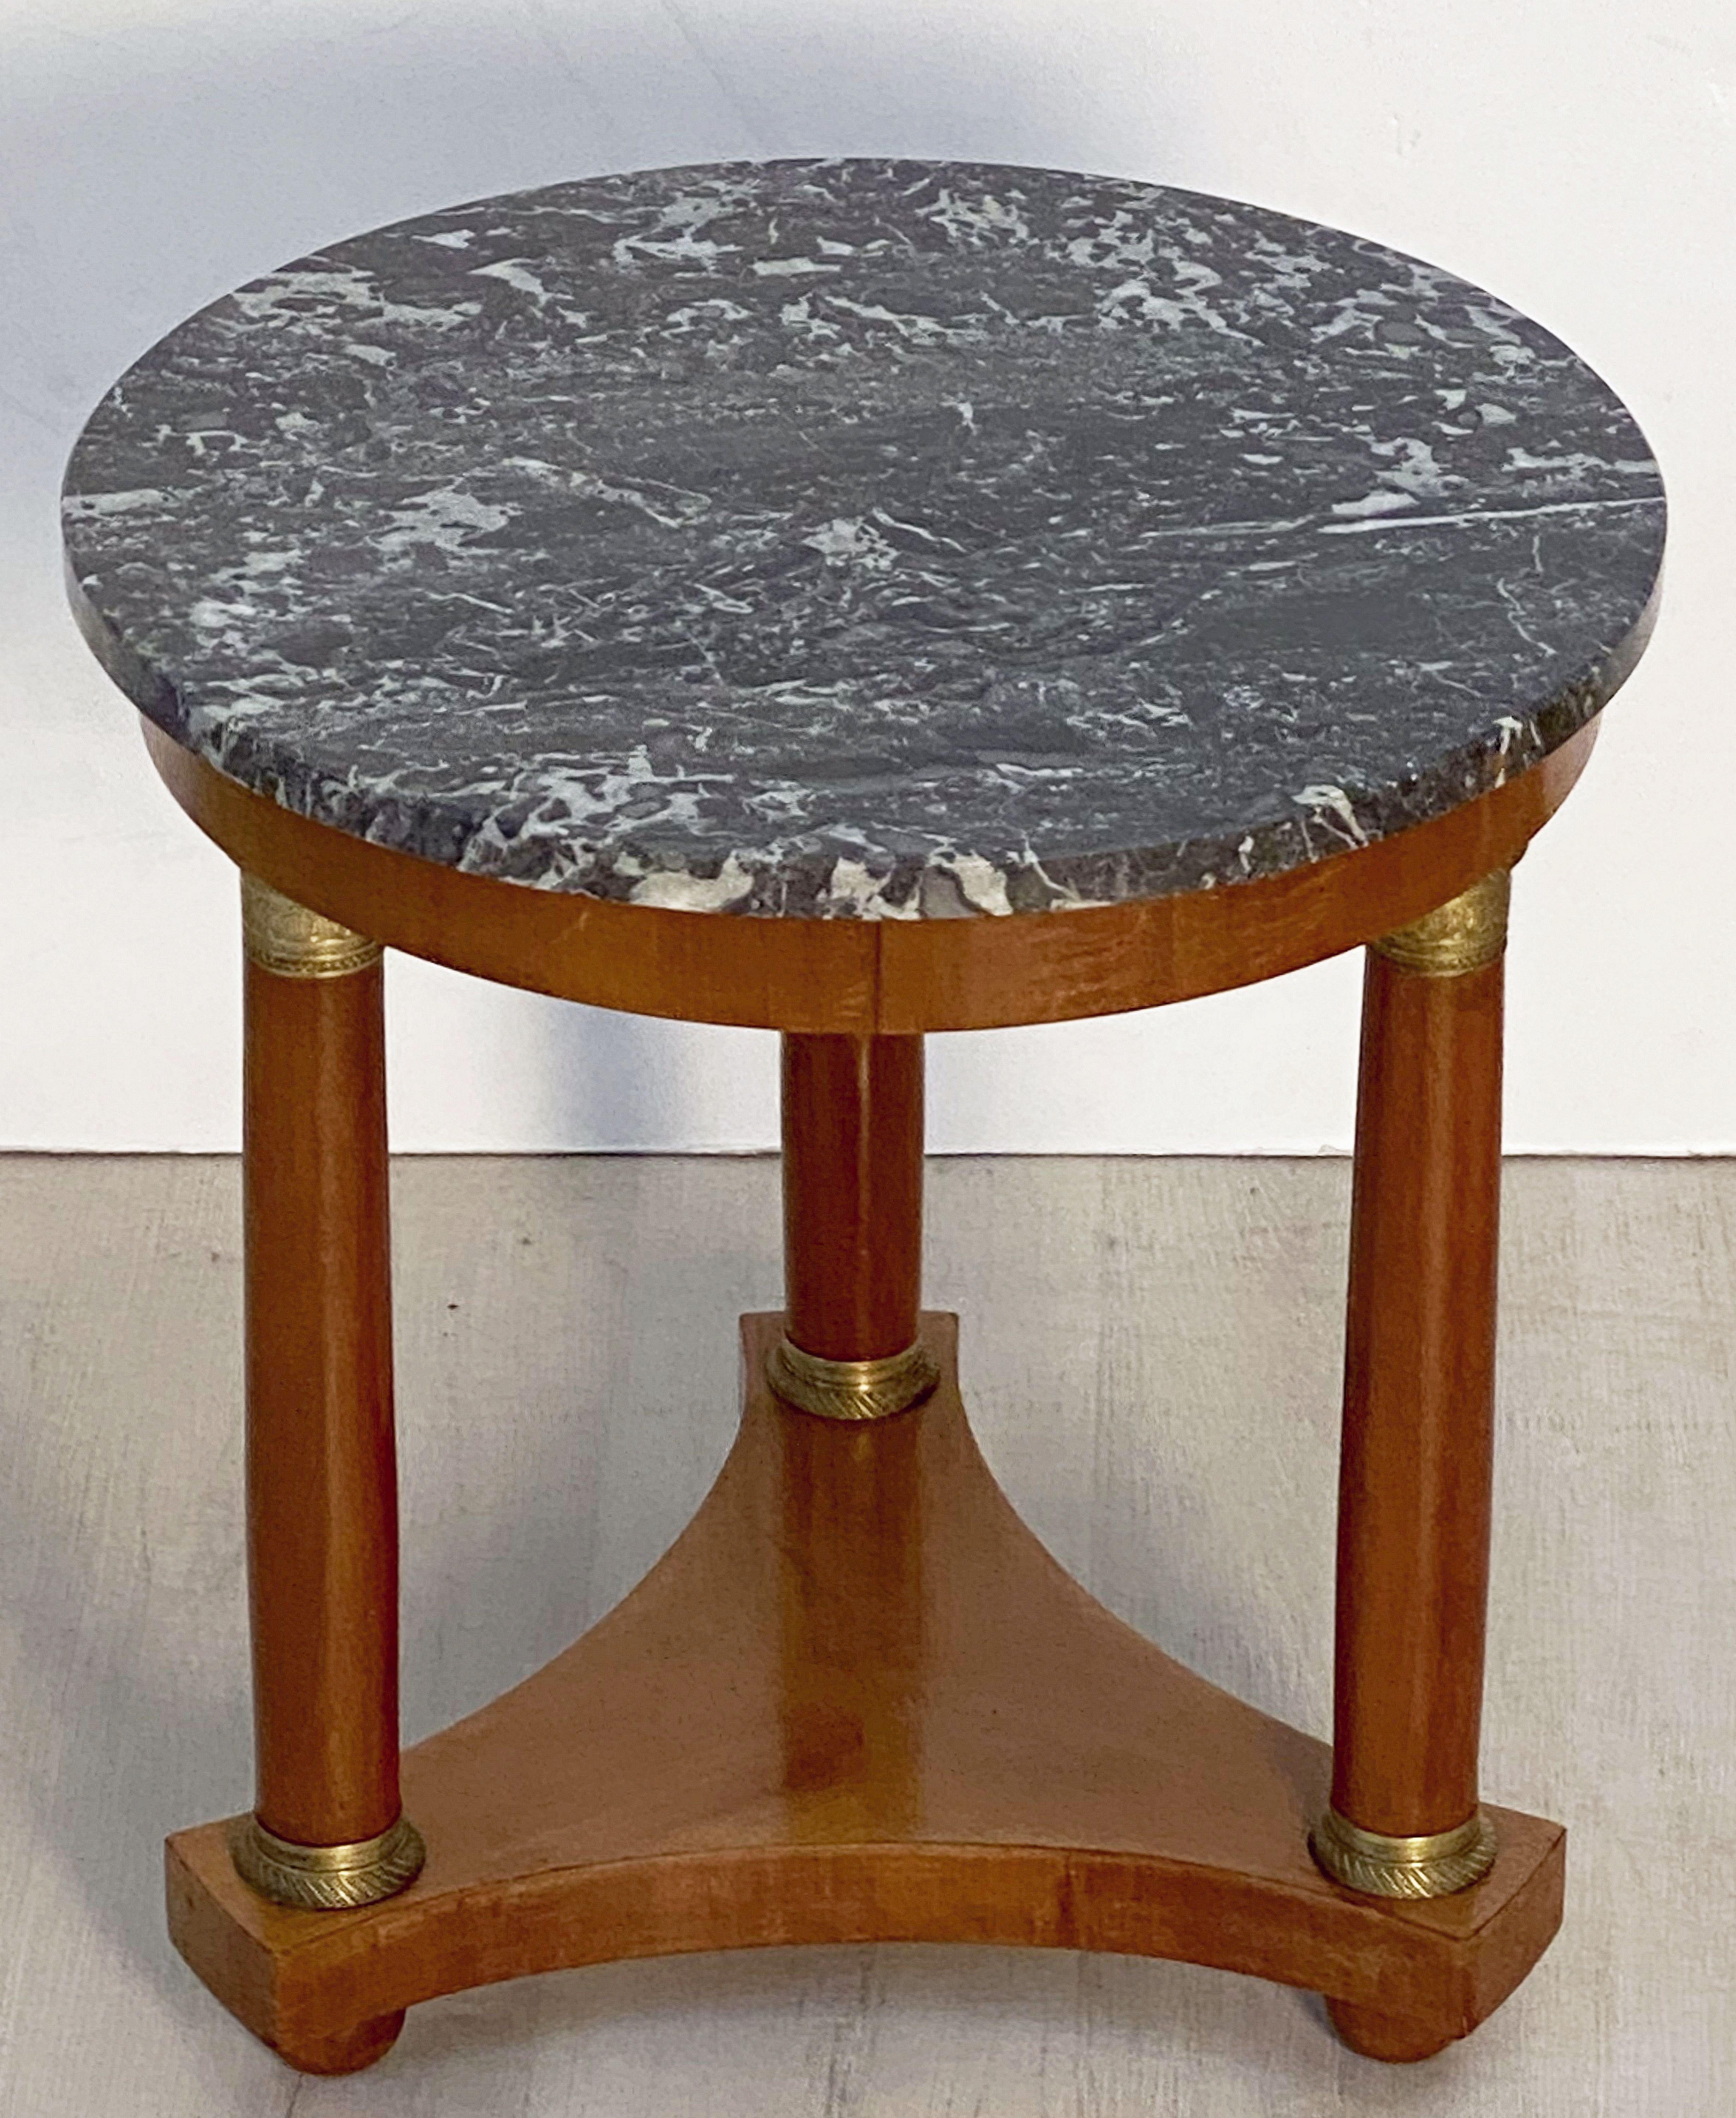 French Marble-Top Table or Guéridon in the Empire Style 1